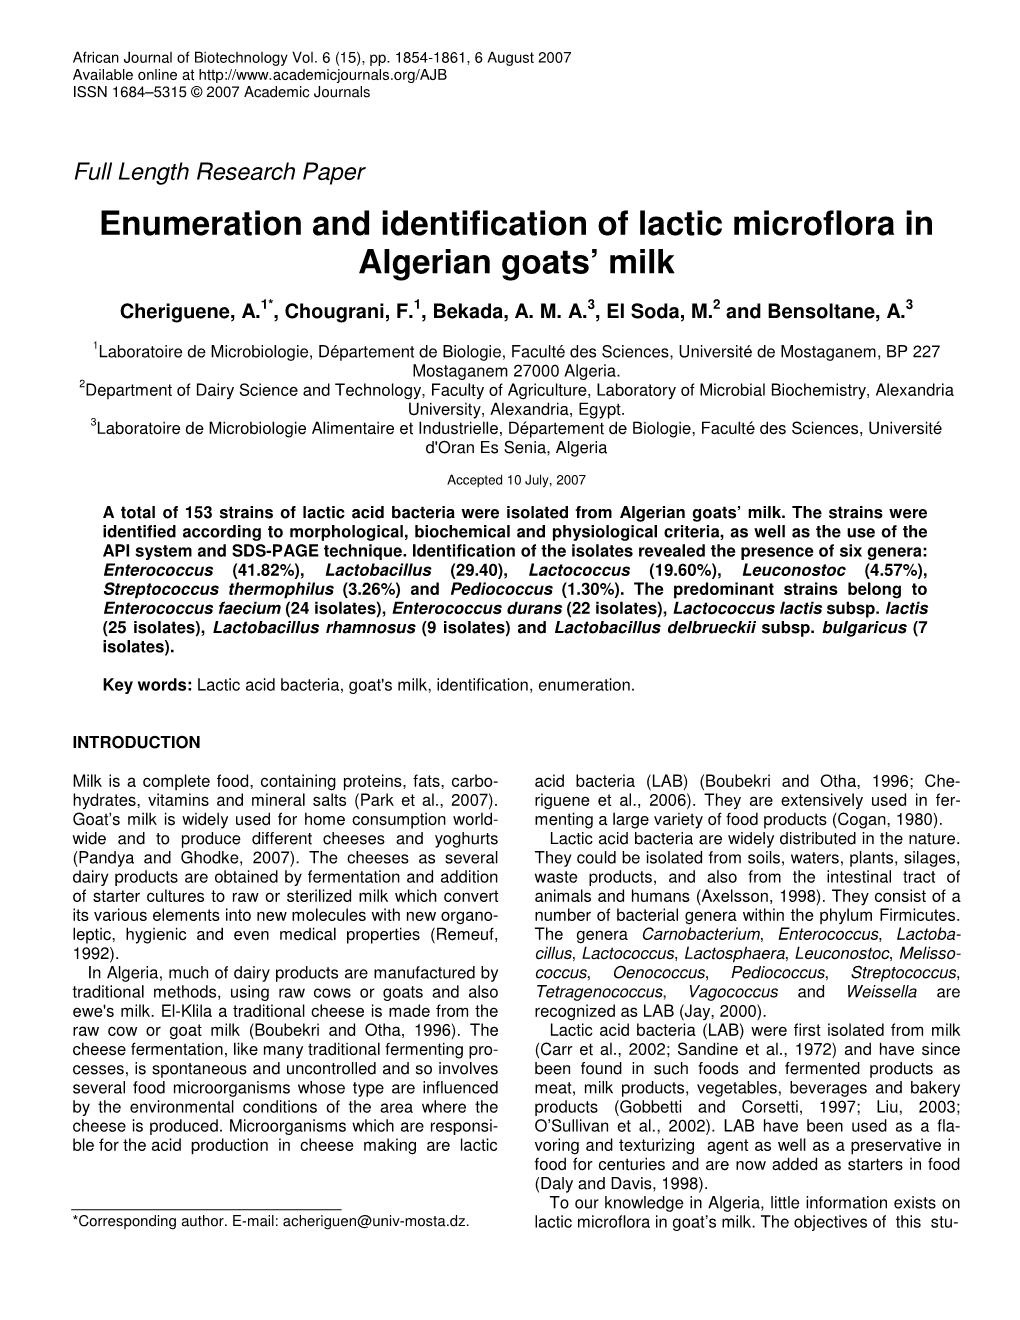 Enumeration and Identification of Lactic Microflora in Algerian Goats' Milk